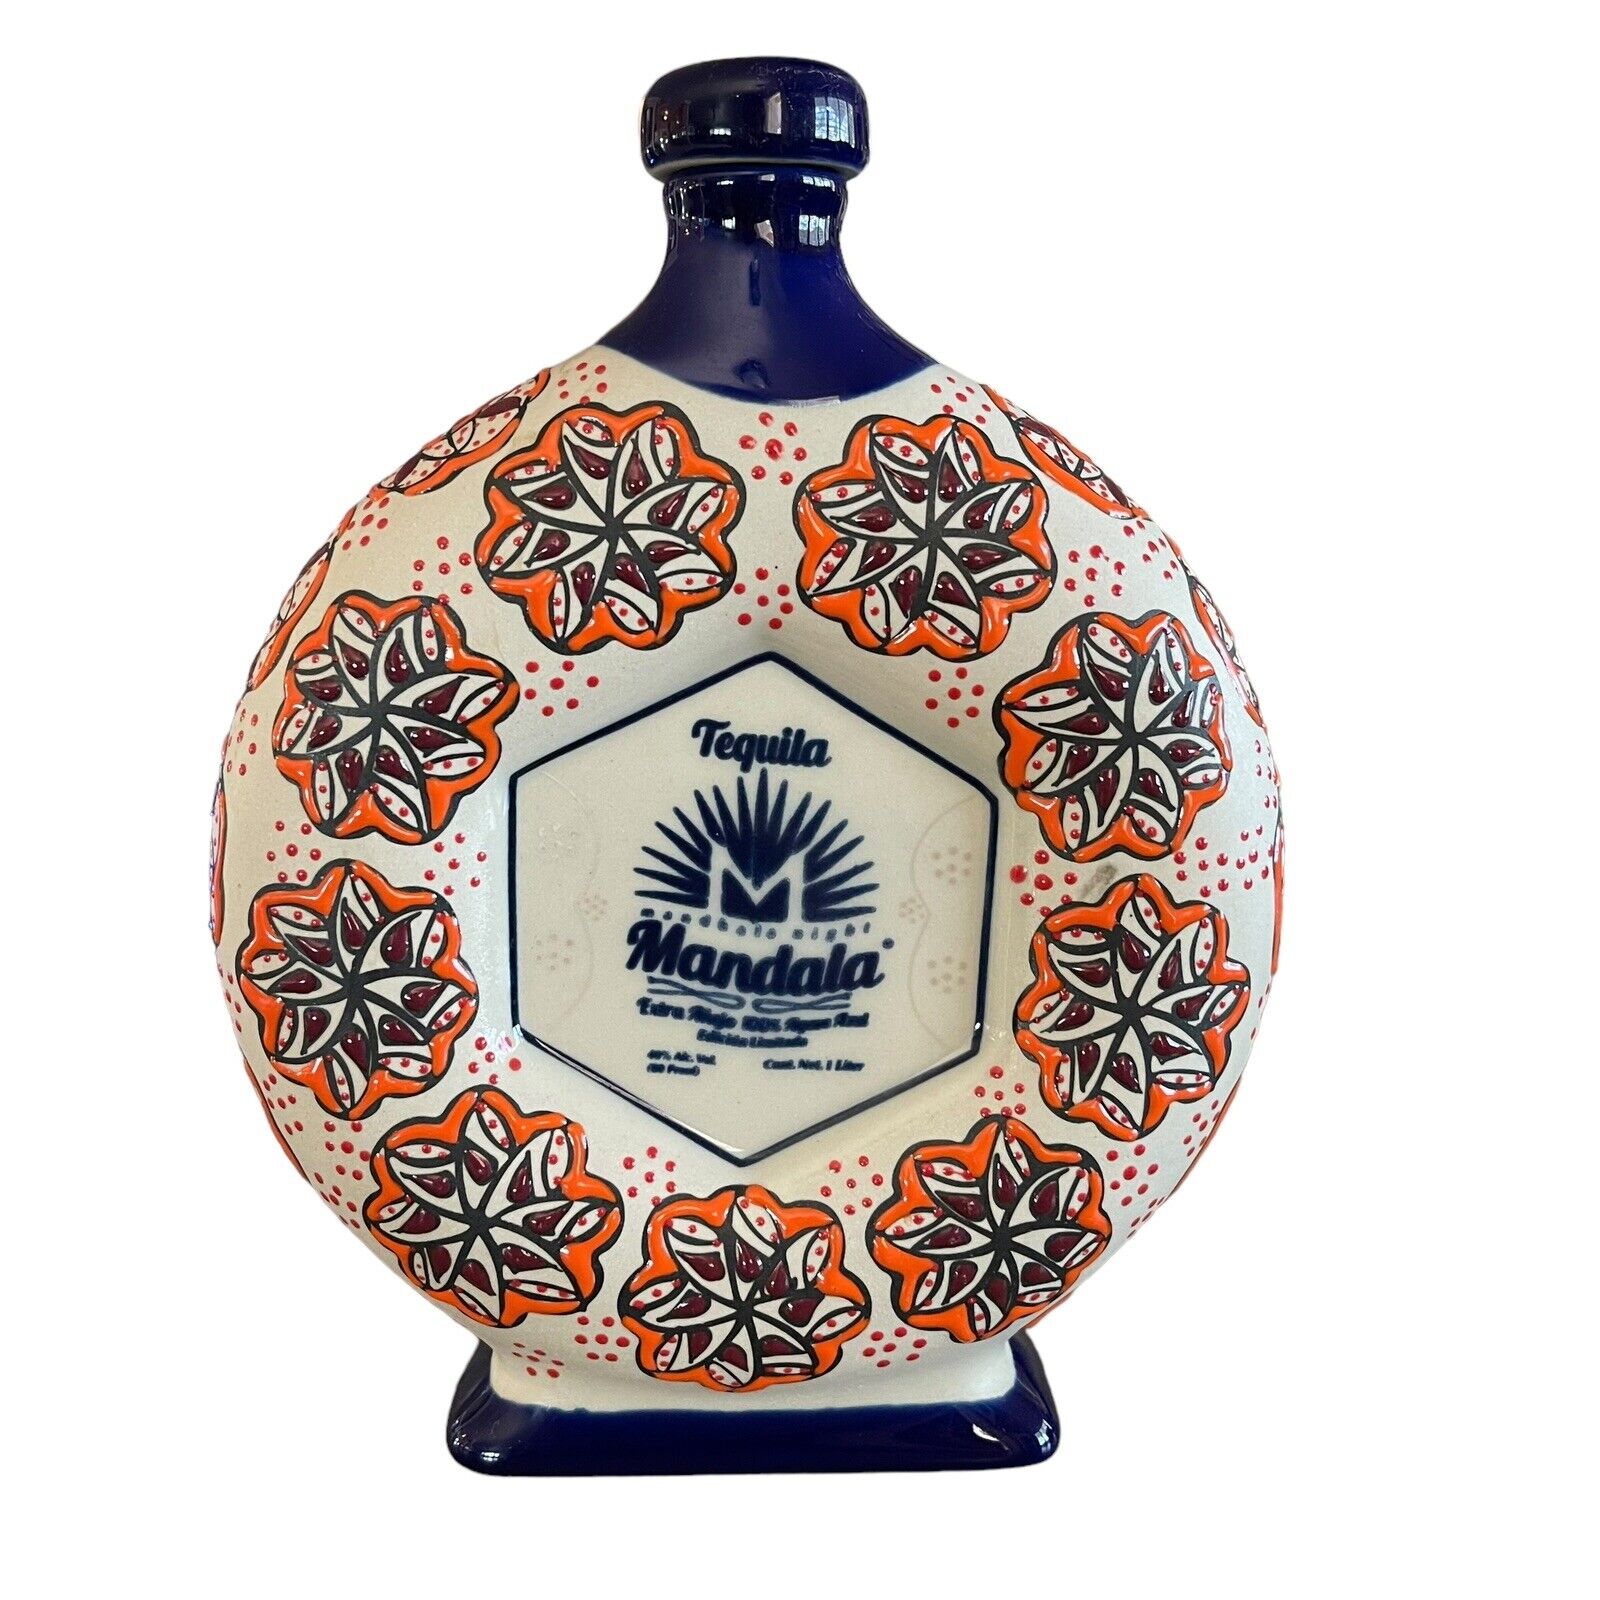 Mandala Tequila Bottle Verified Porcelain Hand Painted Mexico Clay Crafted Empty